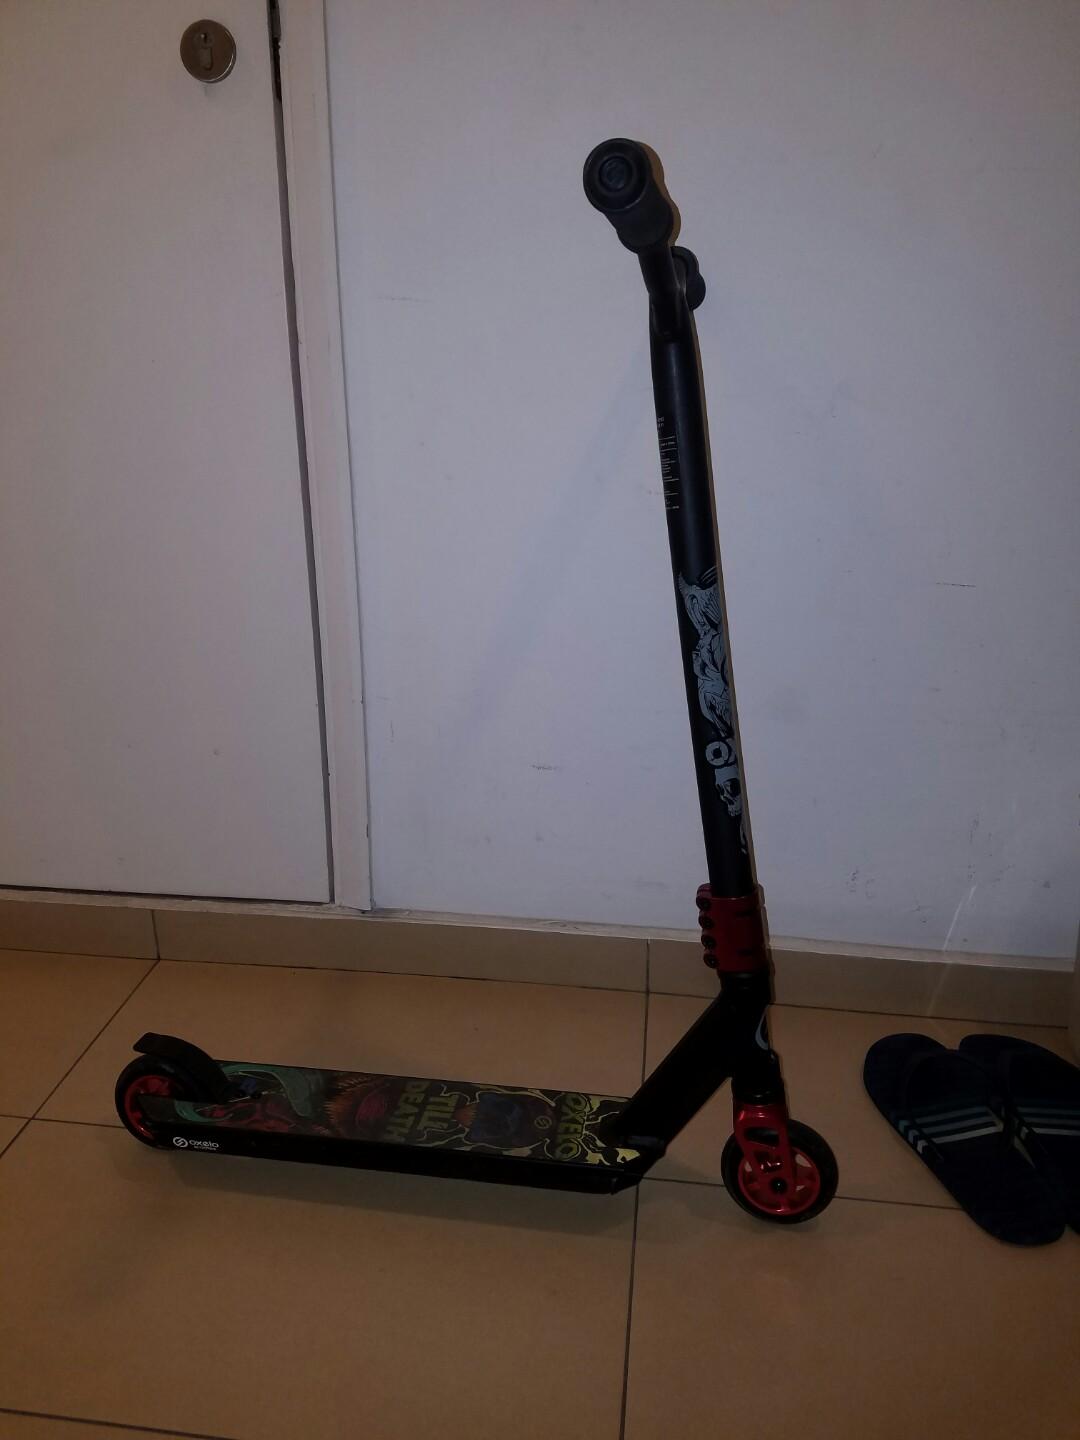 Stunt scooter oxelo mf 1.8 plus, Sports Equipment, PMDs, E-Scooters   E-Bikes, Other PMDs  Parts on Carousell